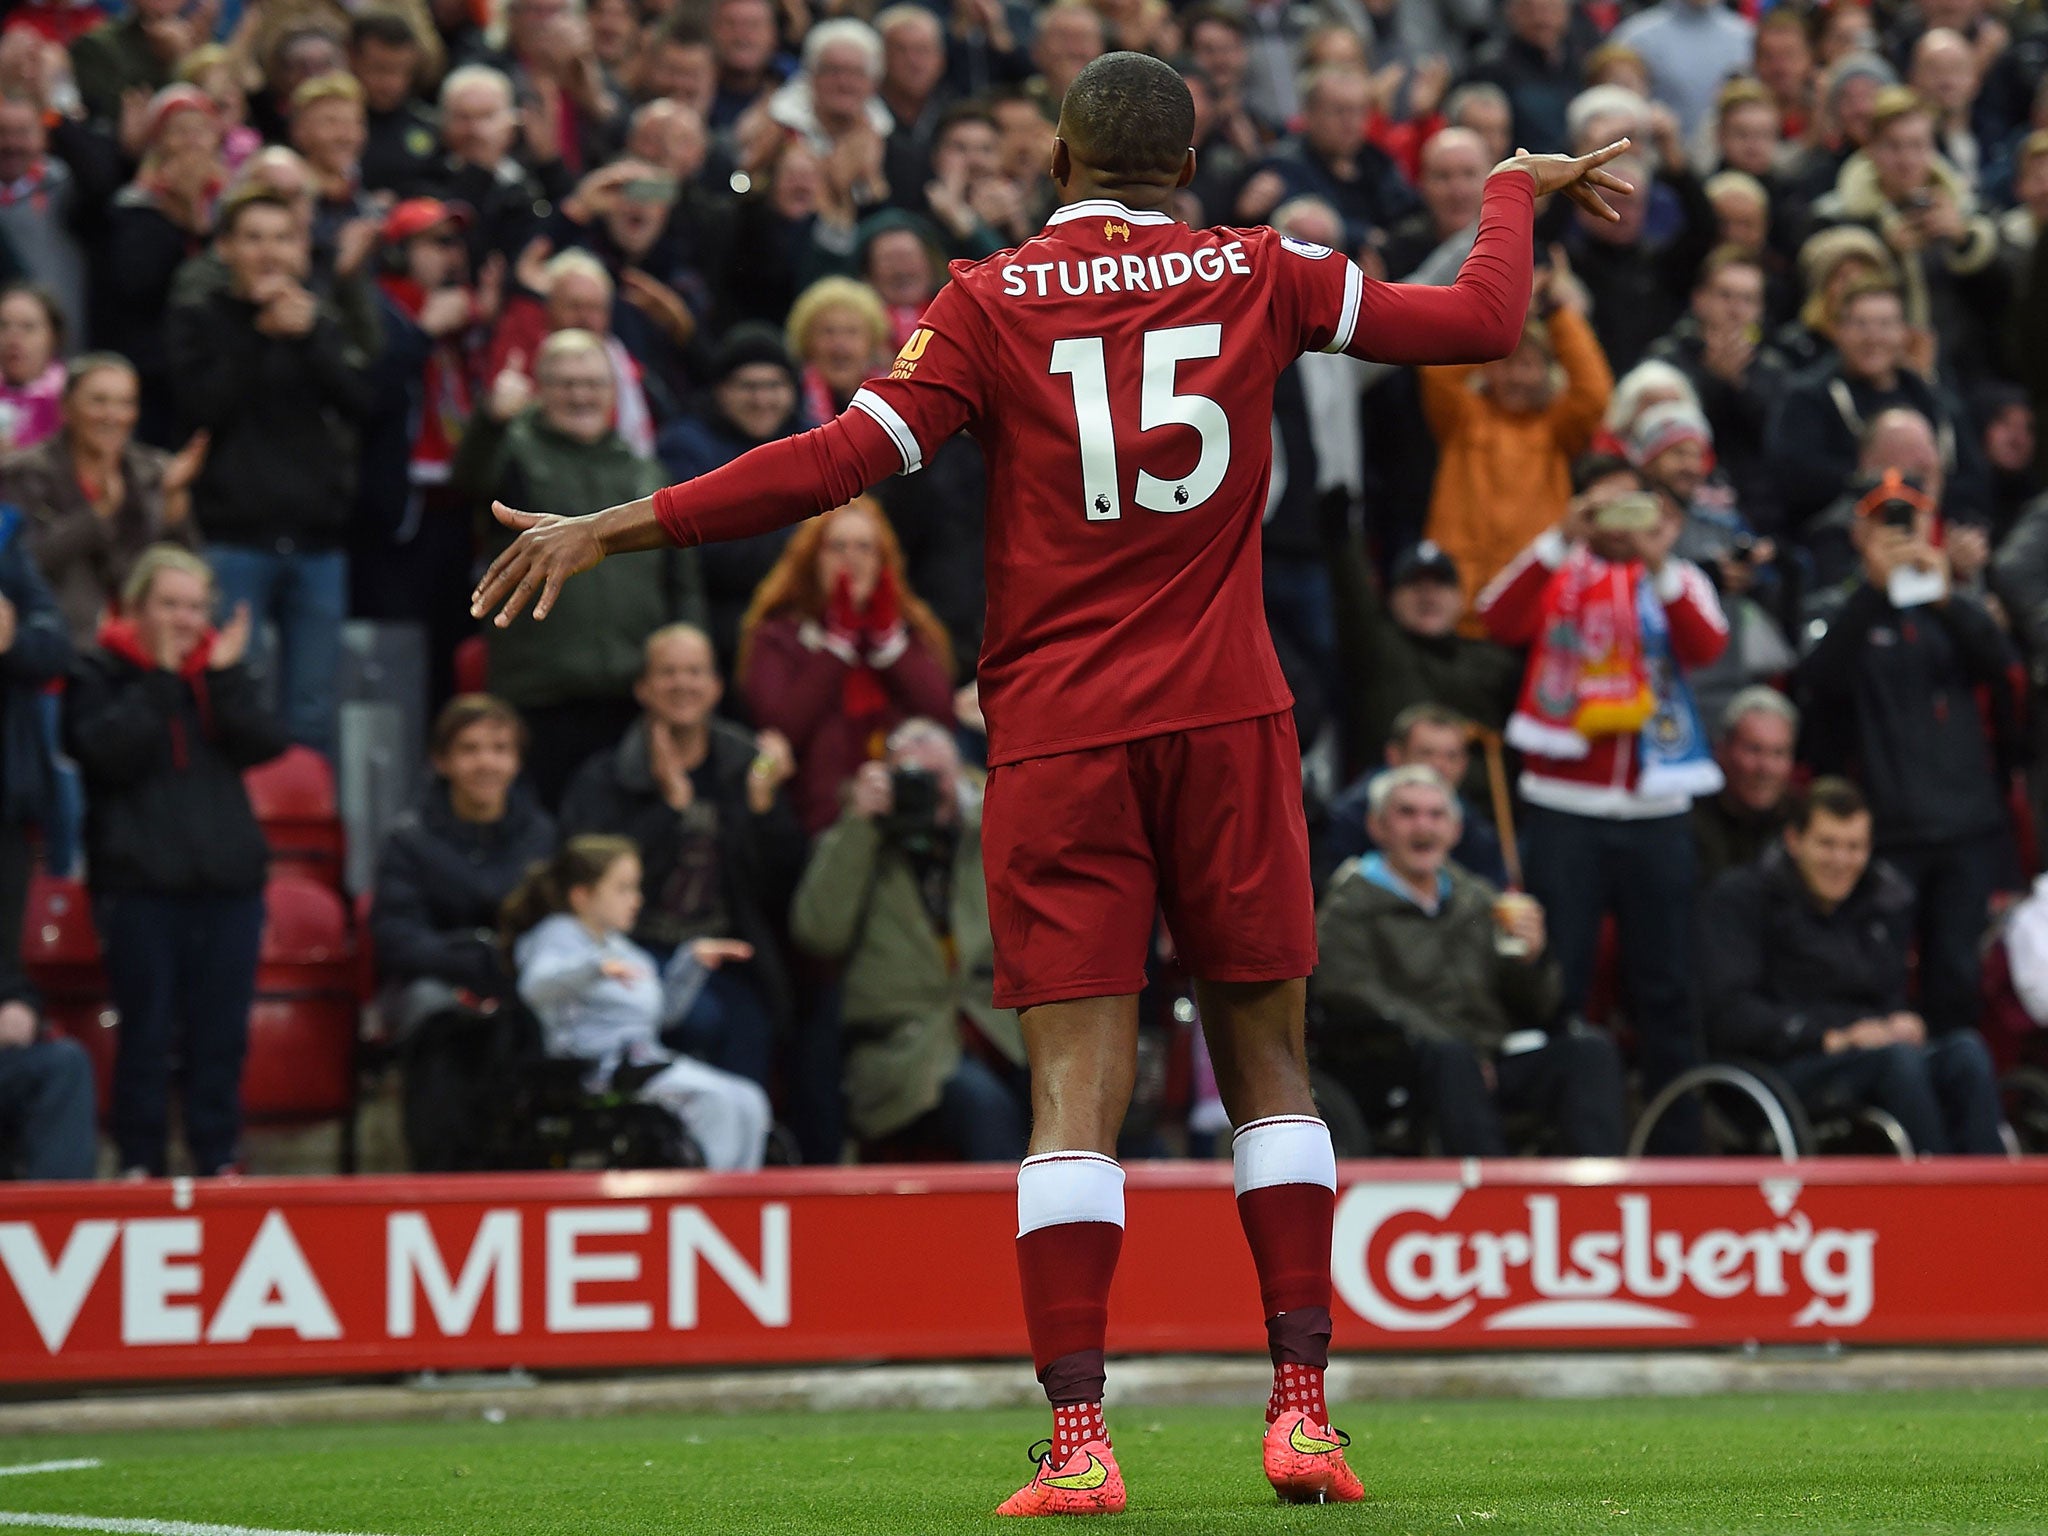 Sturridge was once adored at Anfield